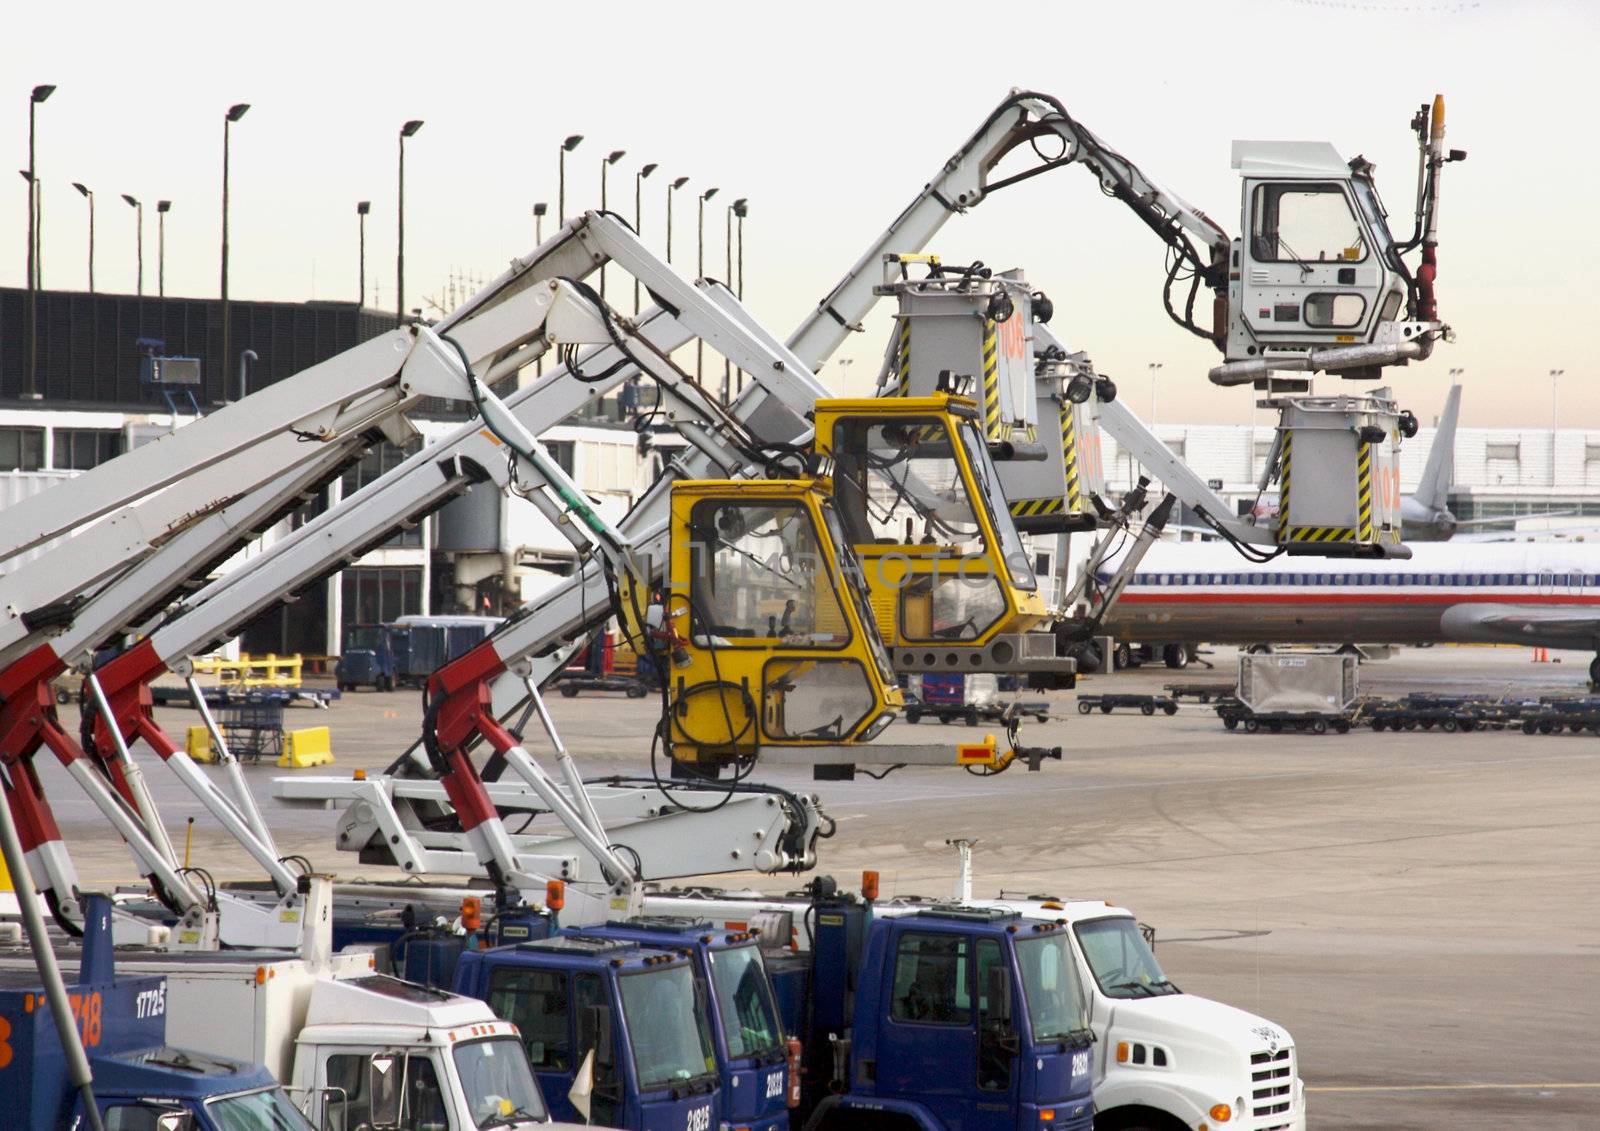 Deicing Equipment Ready at Airport by Feverpitched